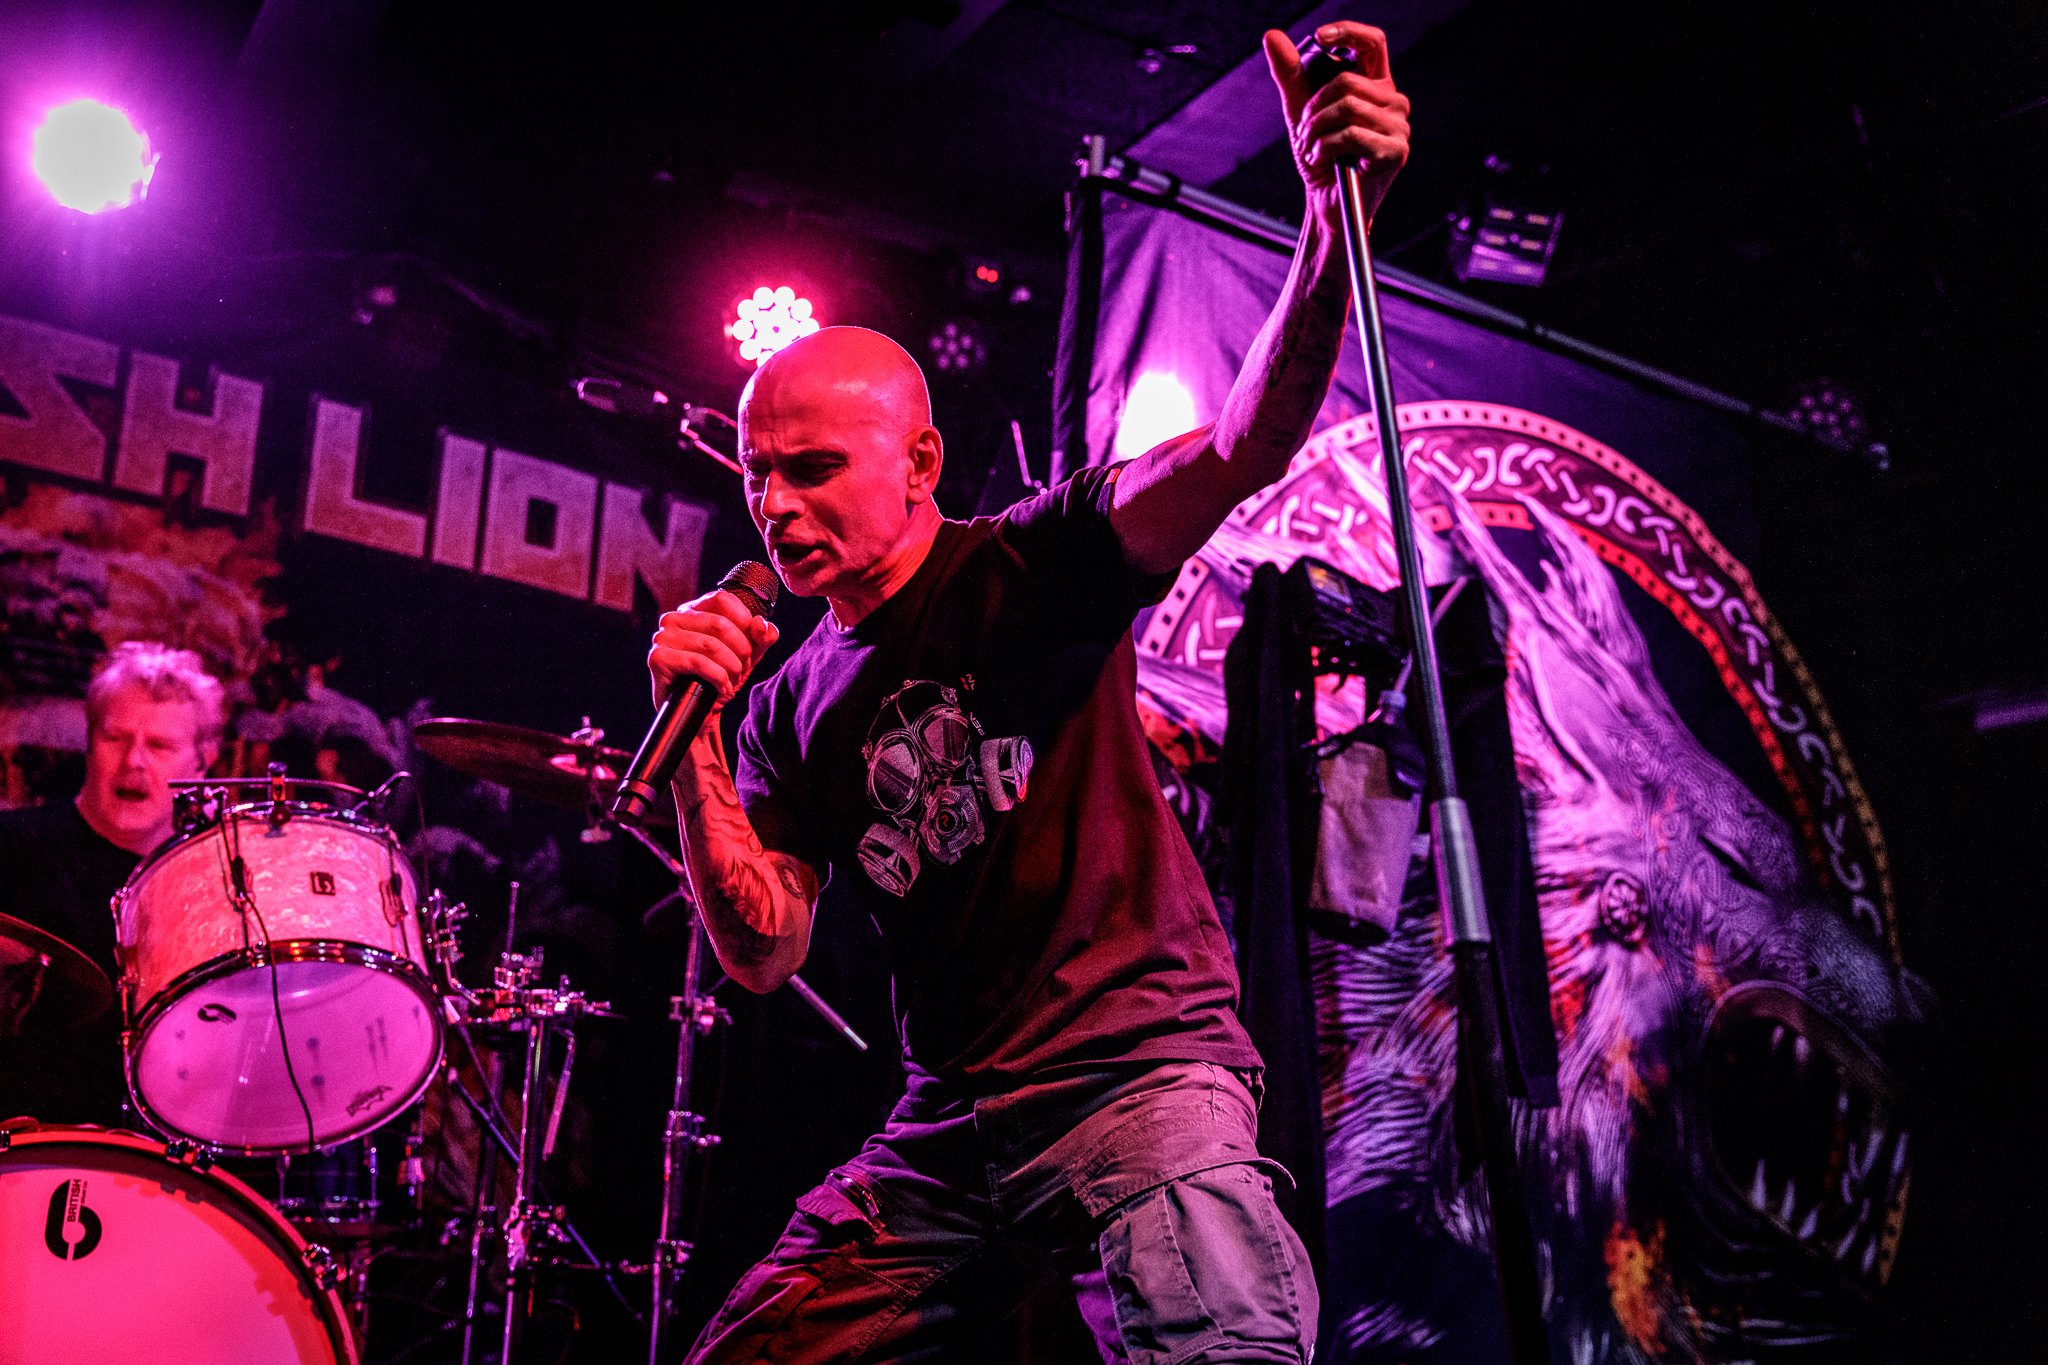 British Lion at Rebellion in Manchester on November 29th 2021 ©